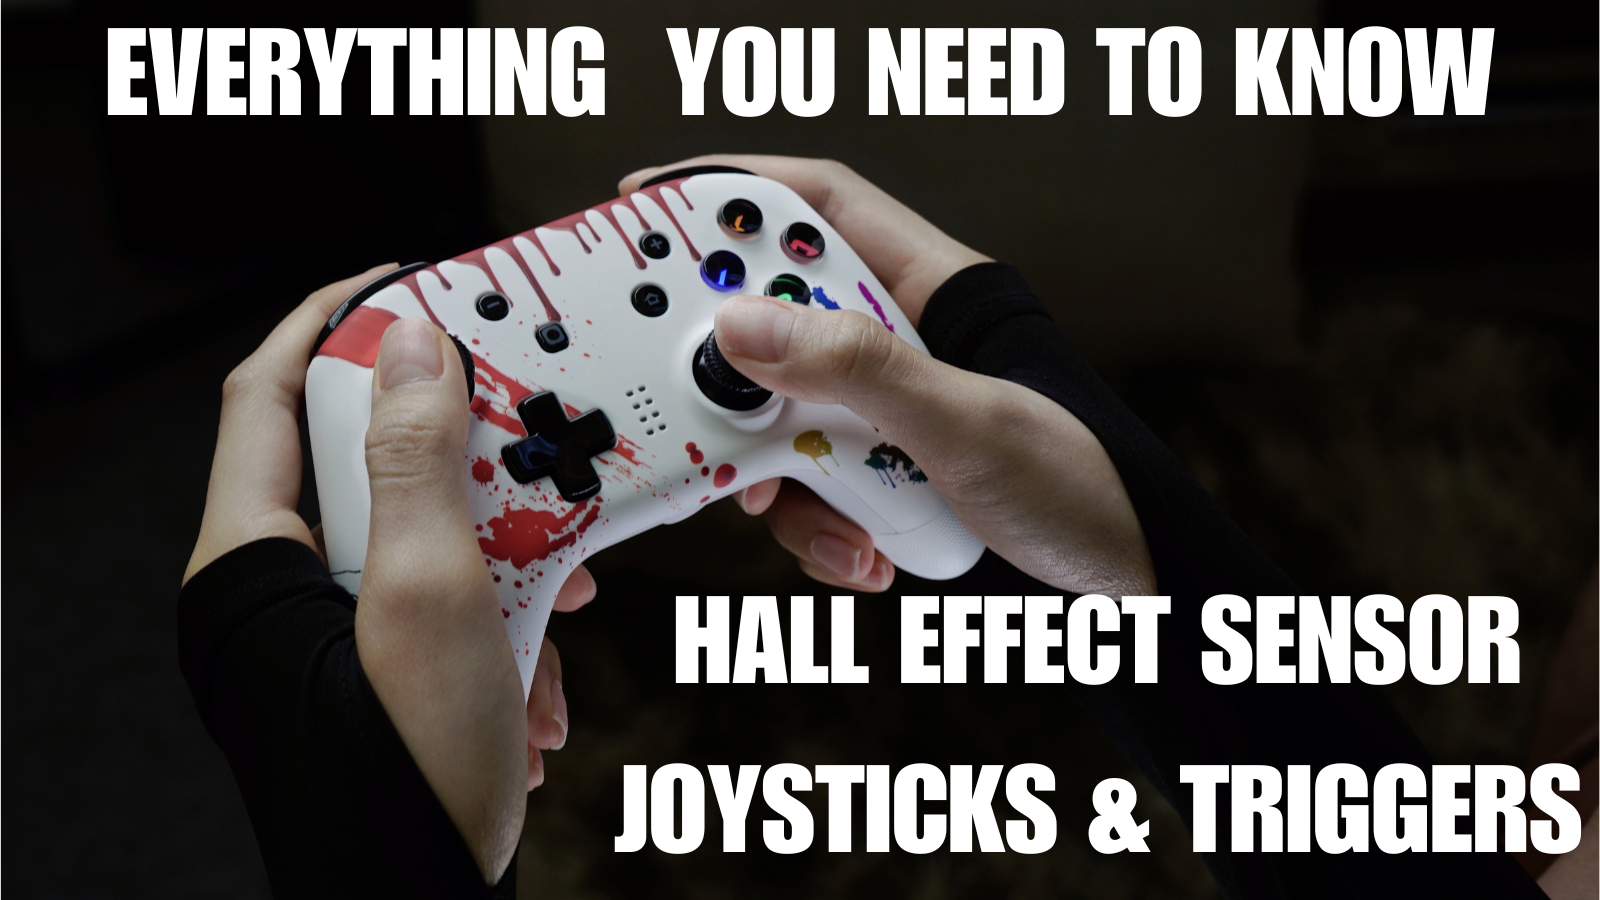 Everything you need to know about Hall Effect Sensing Joysticks & Triggers and Potentiometer Joysticks & Triggers